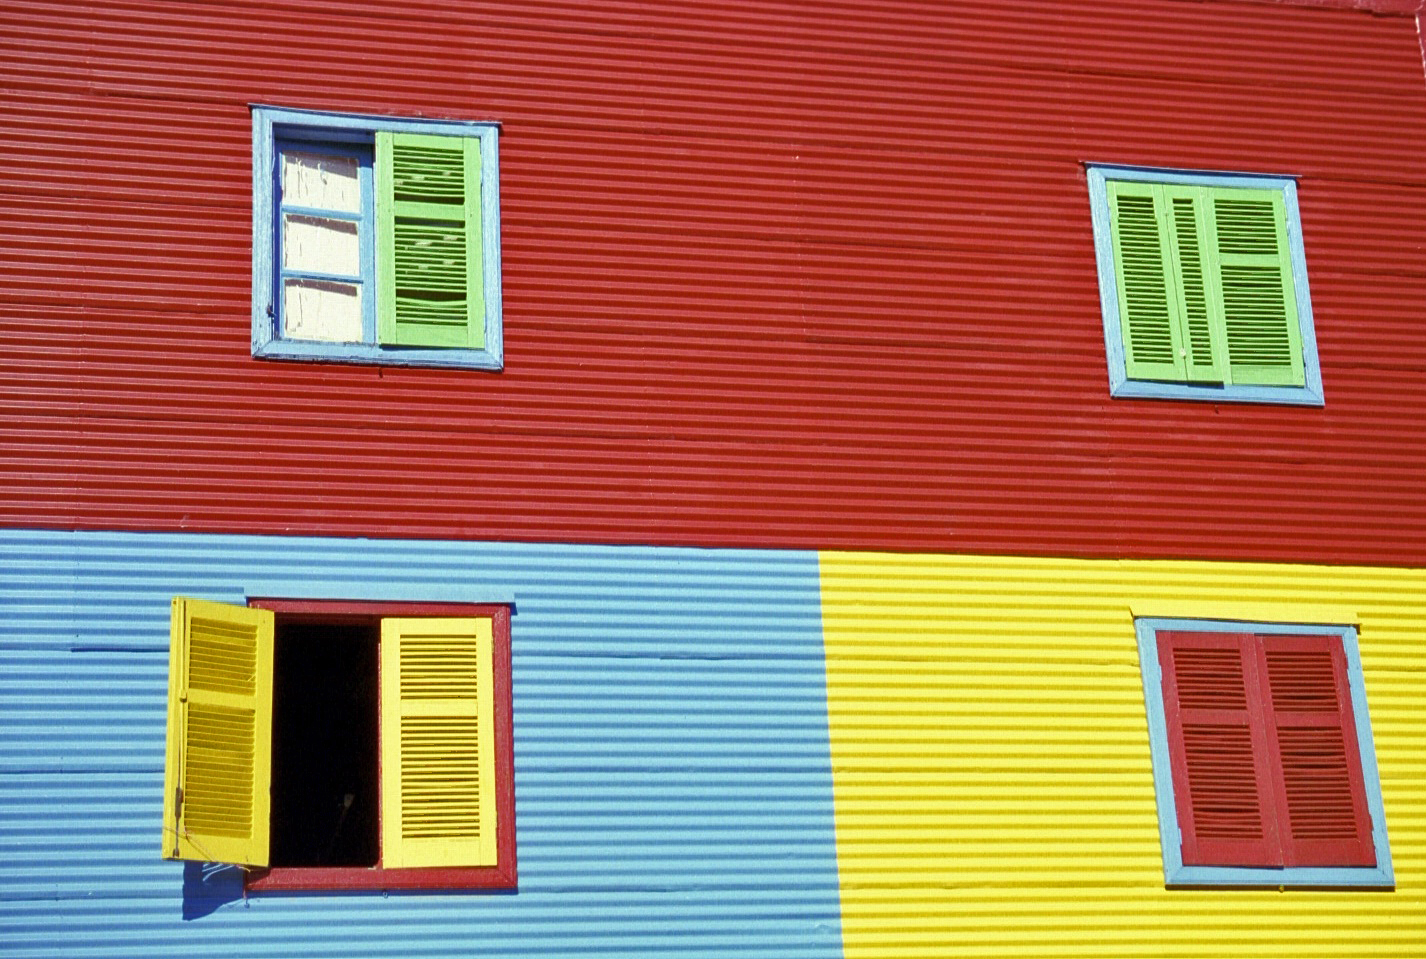 the La Boca neighborhood, Buenos Aires (this image not suitable for large prints)